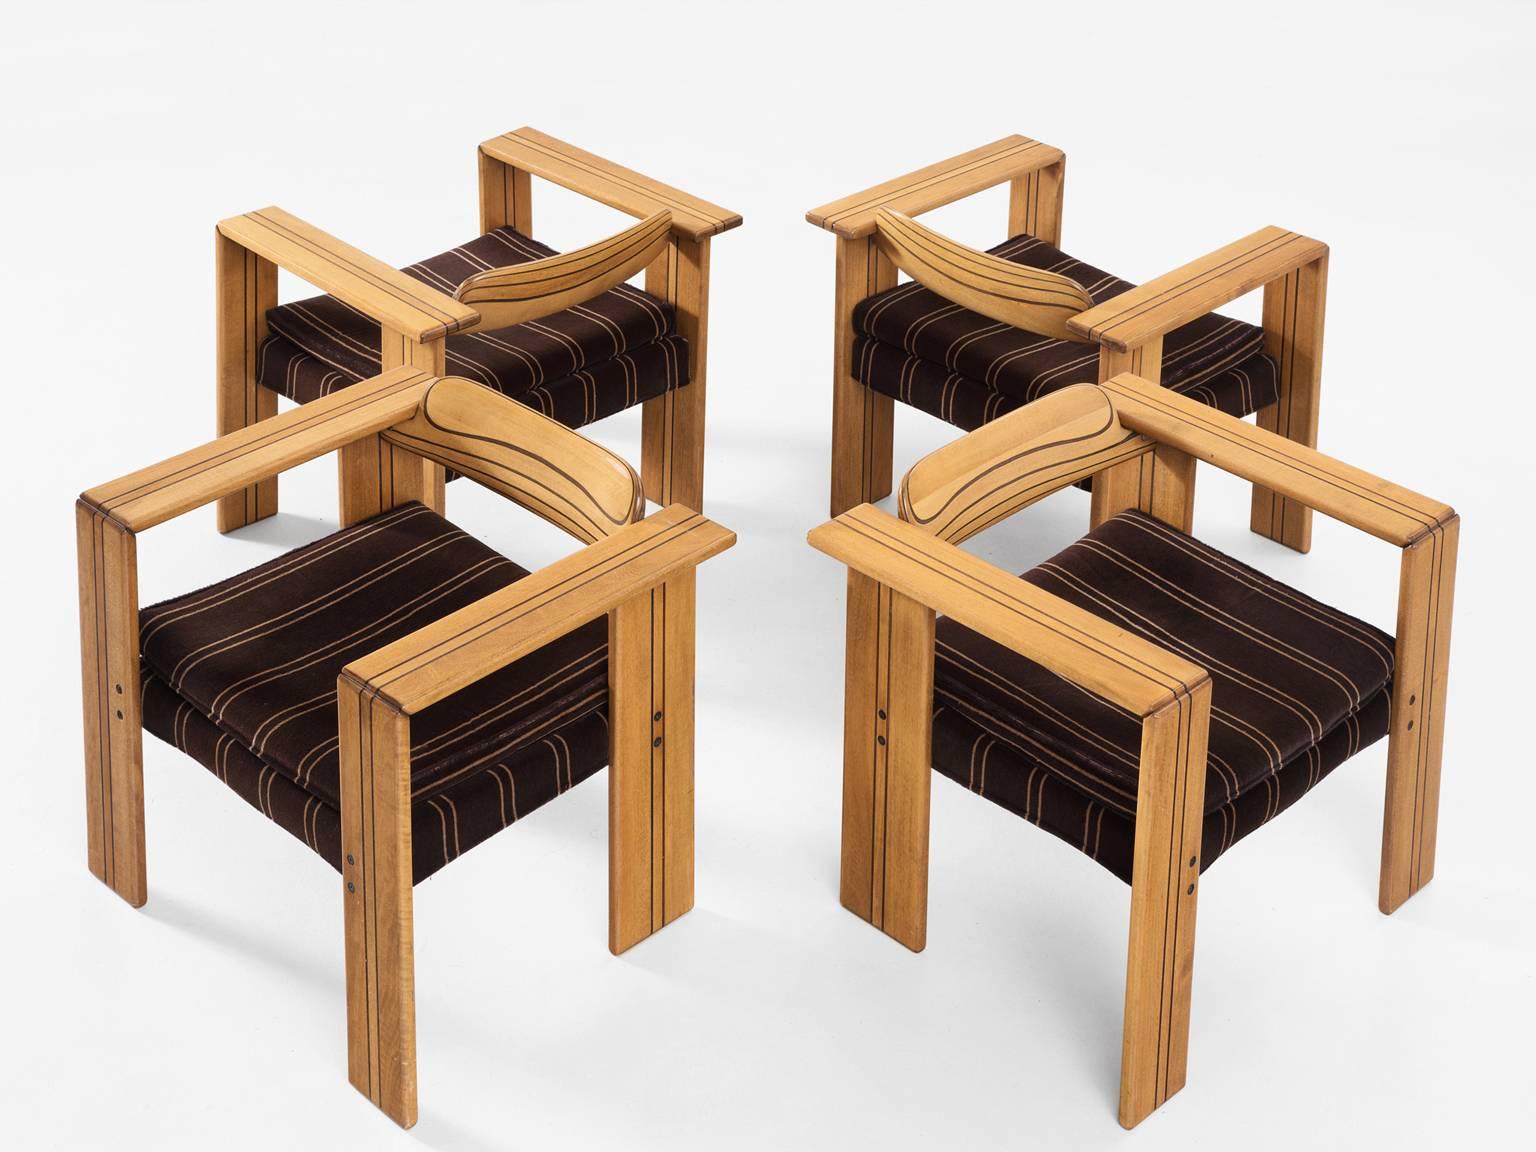 Set of four 'Artona' armchairs, in walnut and fabric, by Afra & Tobia Scarpa for Maxalto, Italy 1975. 

Quartet of cubic Artona lounge chairs by Italian designer couple Afra and Tobia Scarpa. These chairs show absolute stunning craftsmanship. The